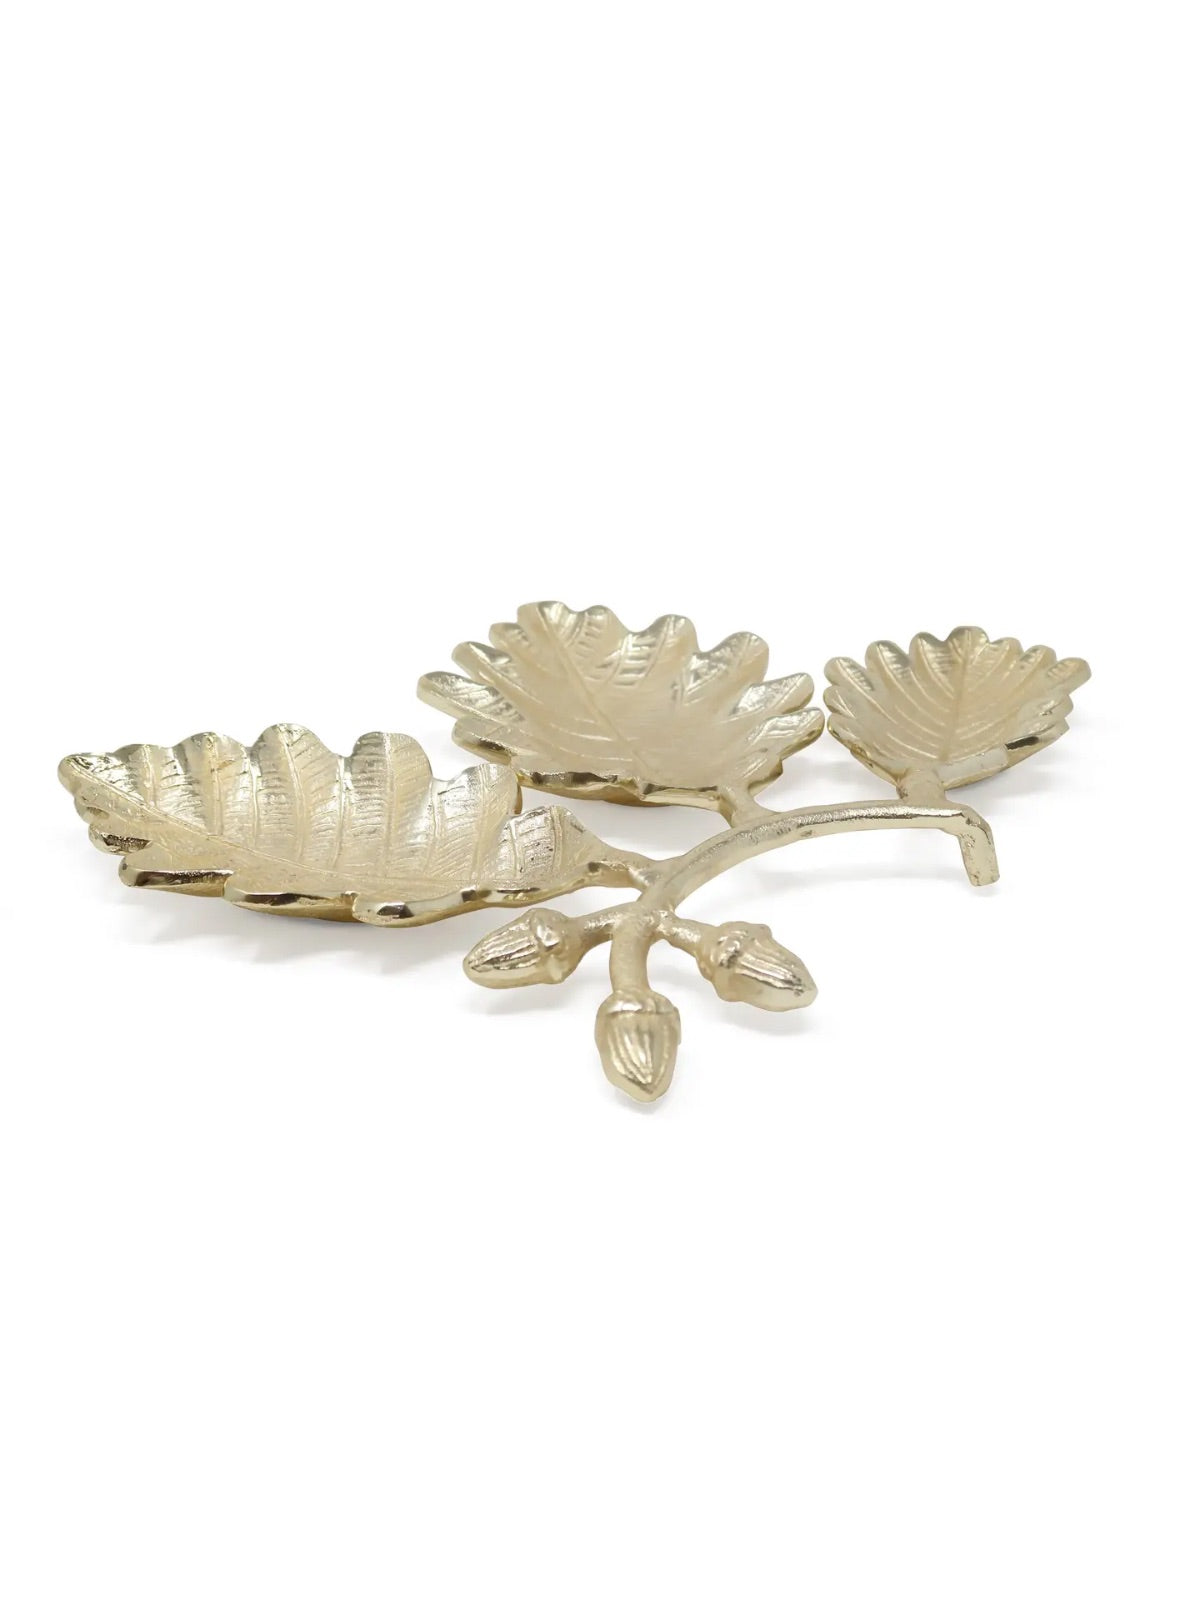 Stainless Steel 3 Section Gold Leaf Serving Dish measuring 13L x 9.25W inches made in India.